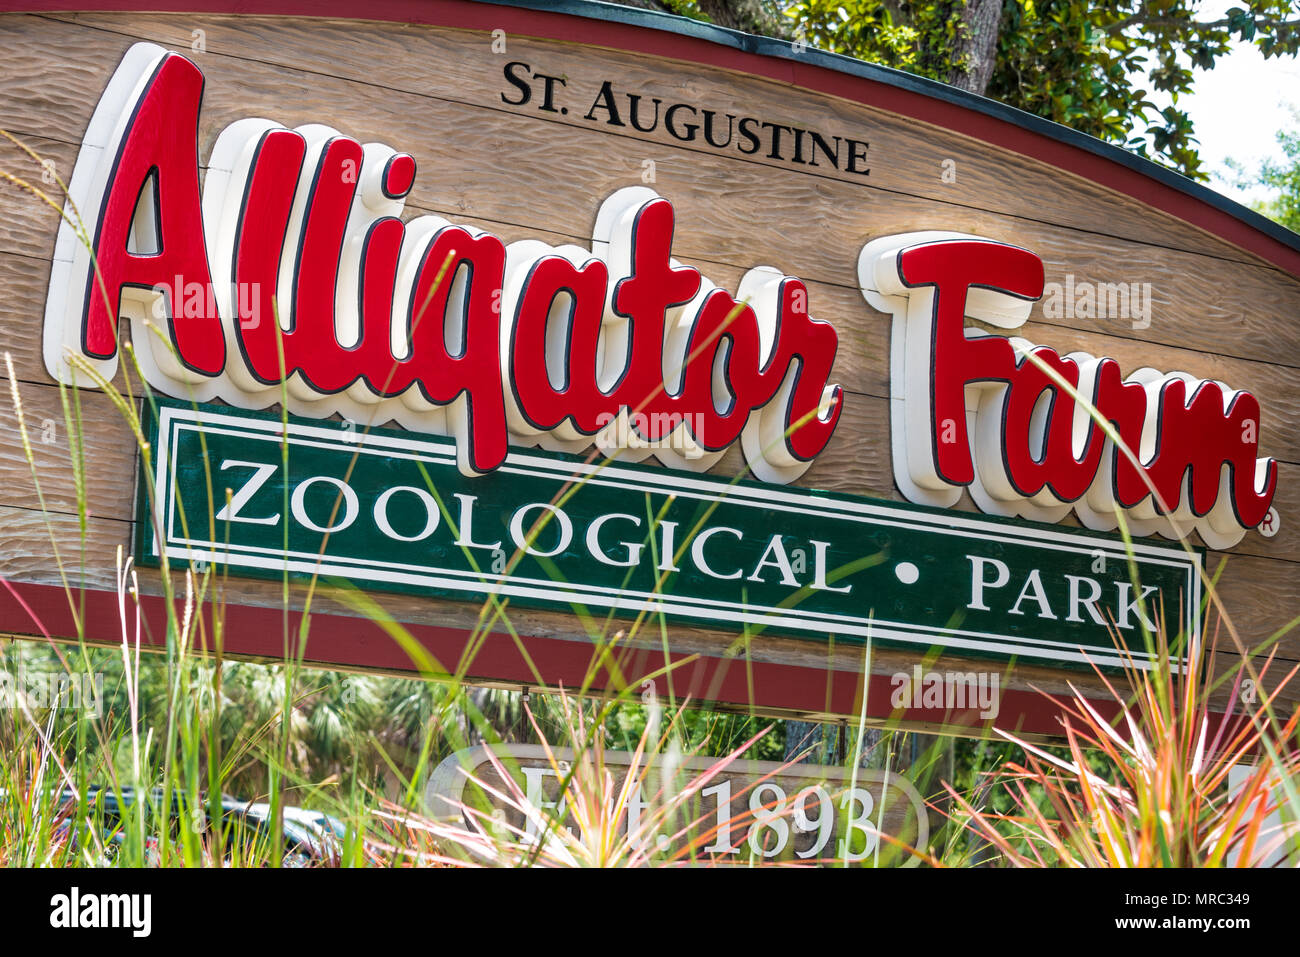 St. Augustine Alligator Farm Zoological Park on Anastasia Island in St. Augustine, Florida is a popular tourist attraction established in 1893. Stock Photo